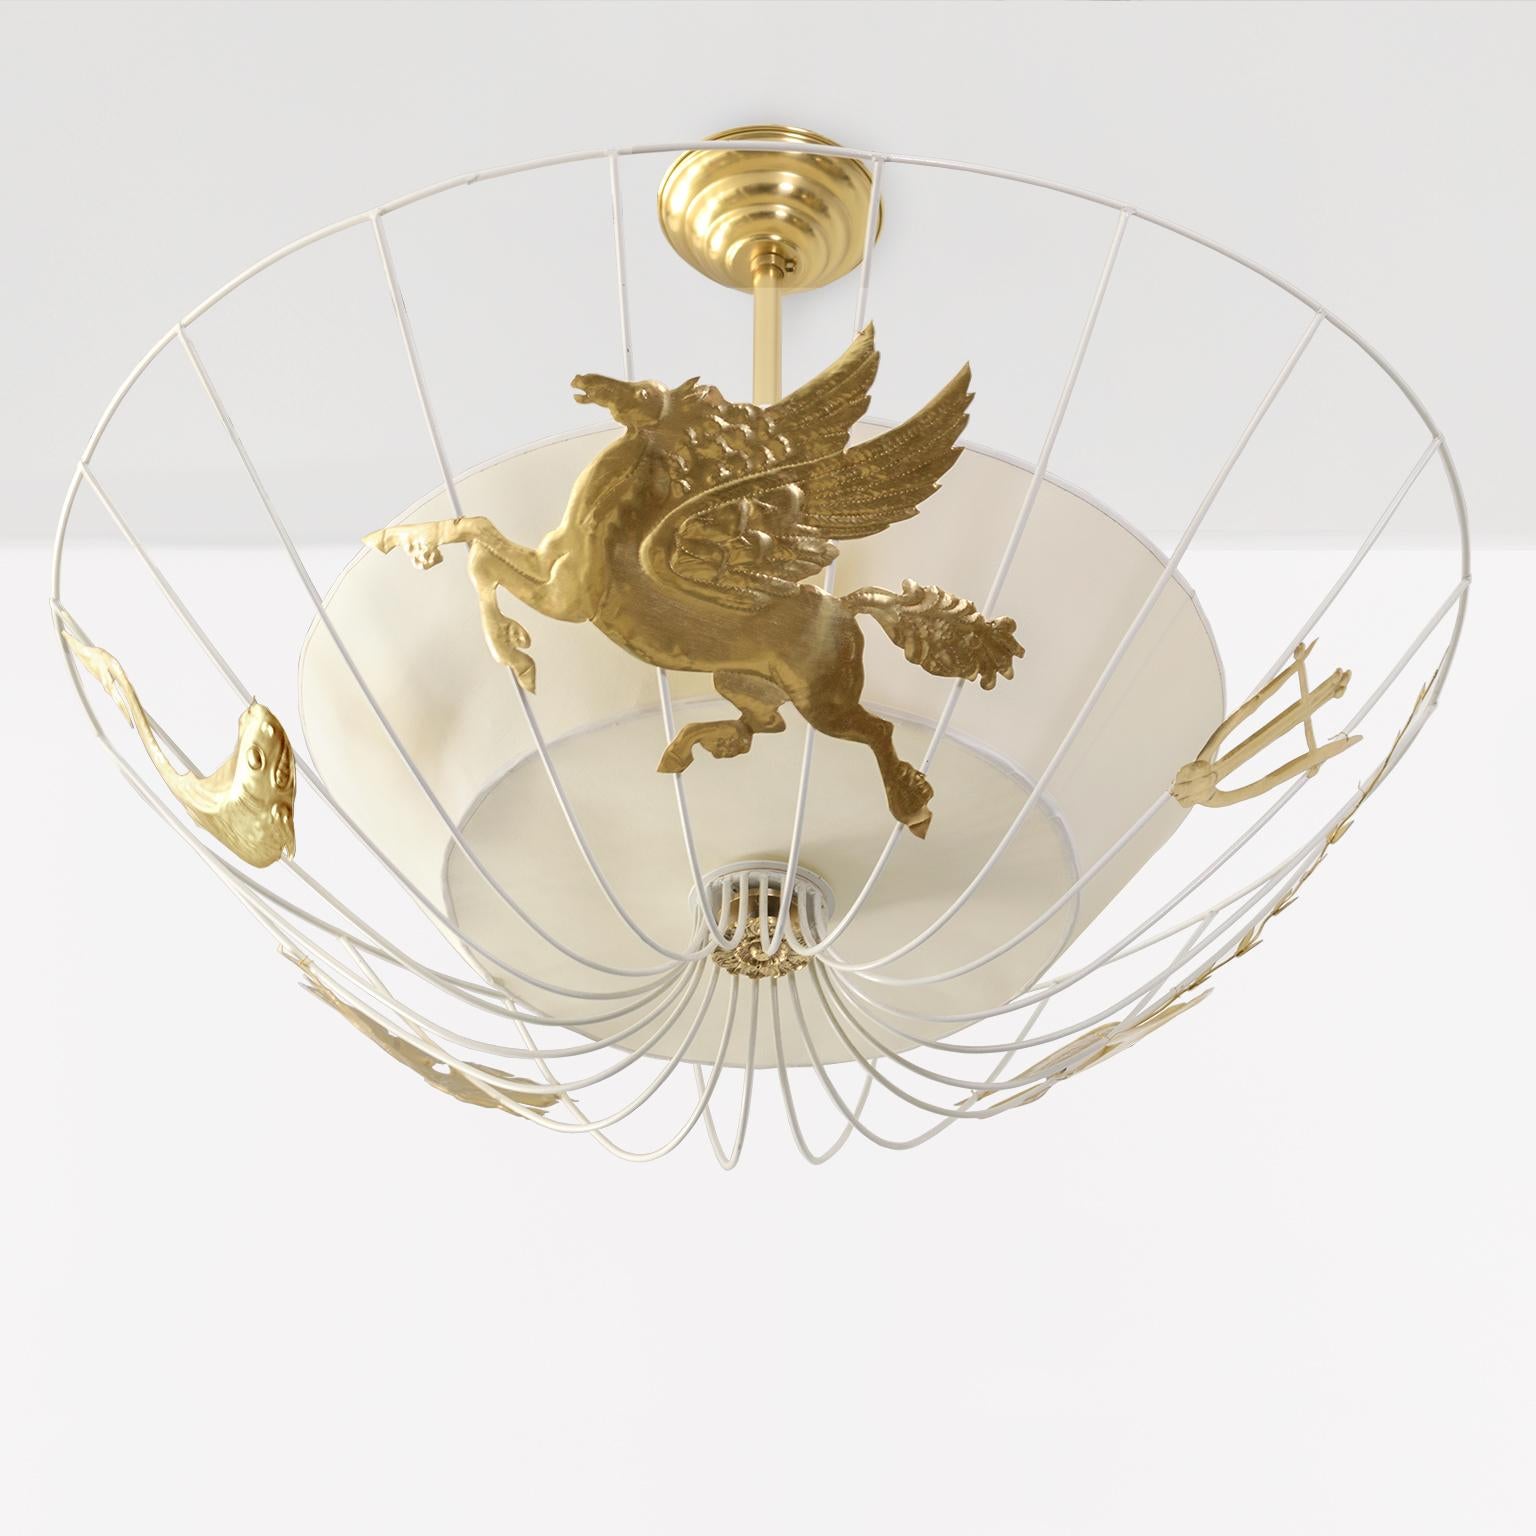 A Hans Bergstrom white lacquered wire frame pendant light with hand hammered embossed surface decorations. A variety of objects and animals include a bird in flight, a branch with leaves, a fish, a lyre, a large grape leaf and the largest element